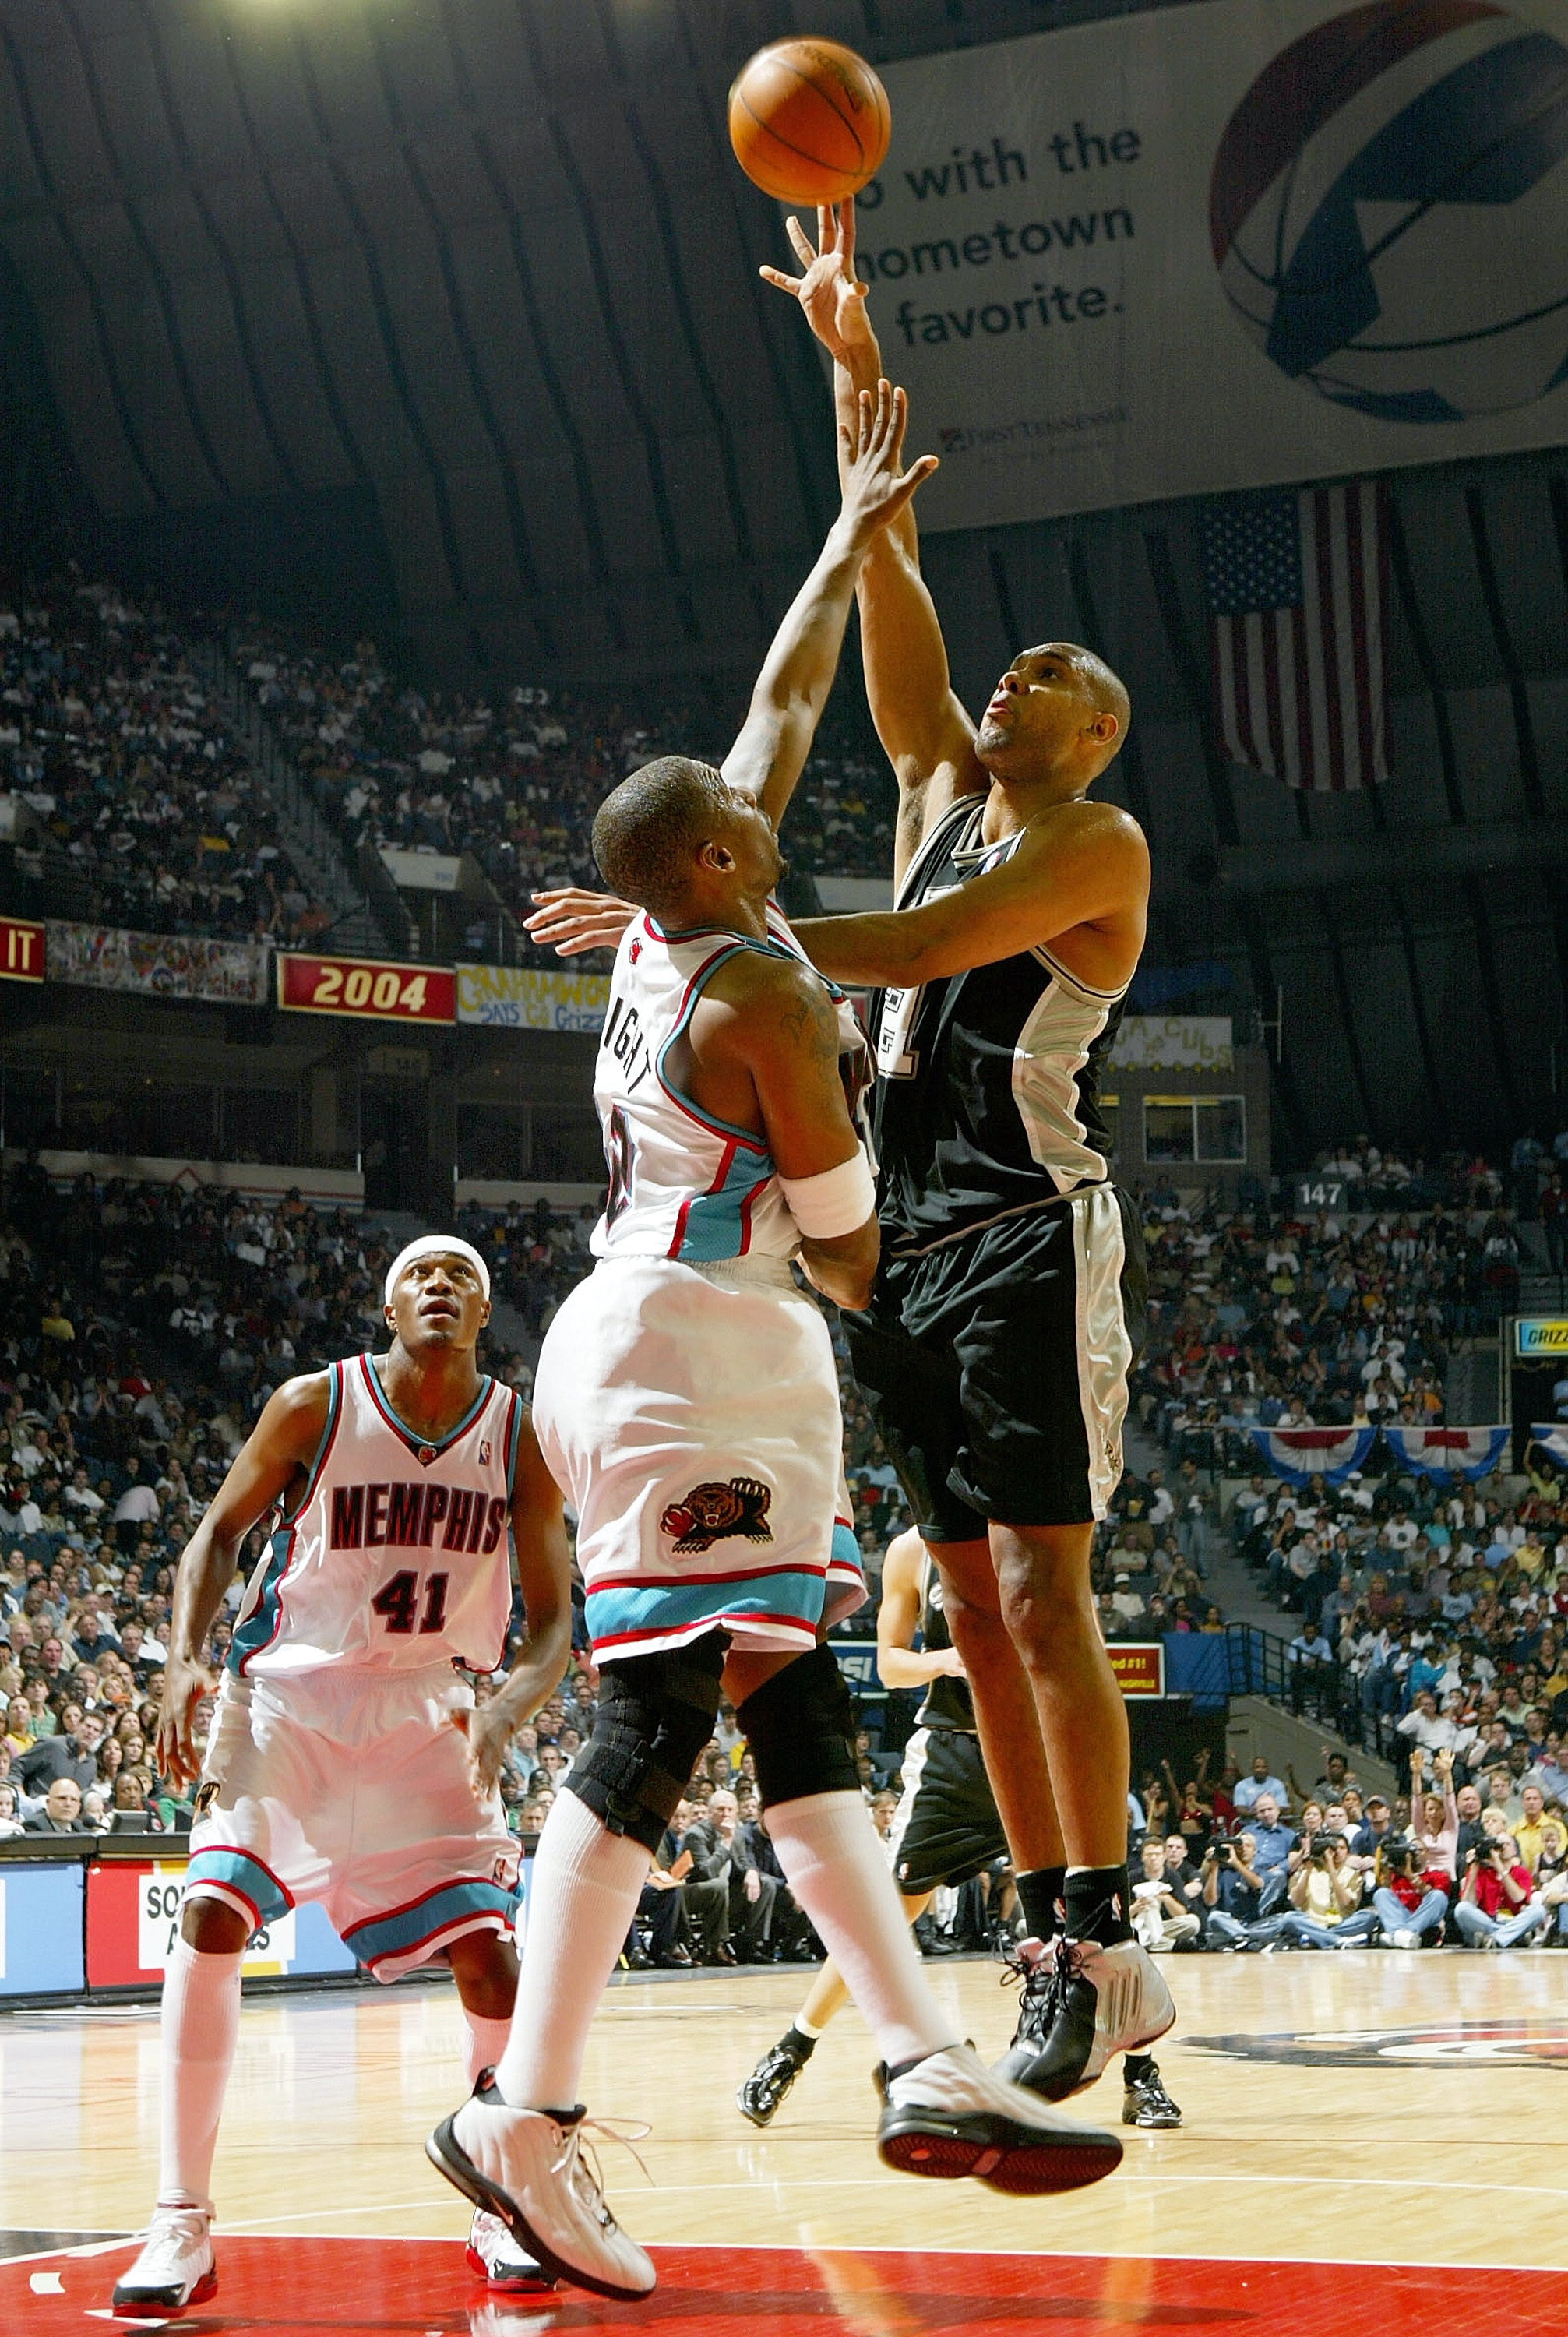 MEMPHIS, TN - APRIL 25:  Tim Duncan #21 of San Antonio Spurs puts up a shot over Lorenzen Wright #42 of the Memphis Grizzlies during Game four of Western Conference Quarterfinals of the 2004 NBA Playoffs April 25, 2004 at The Pyramid in Memphis Tennessee.